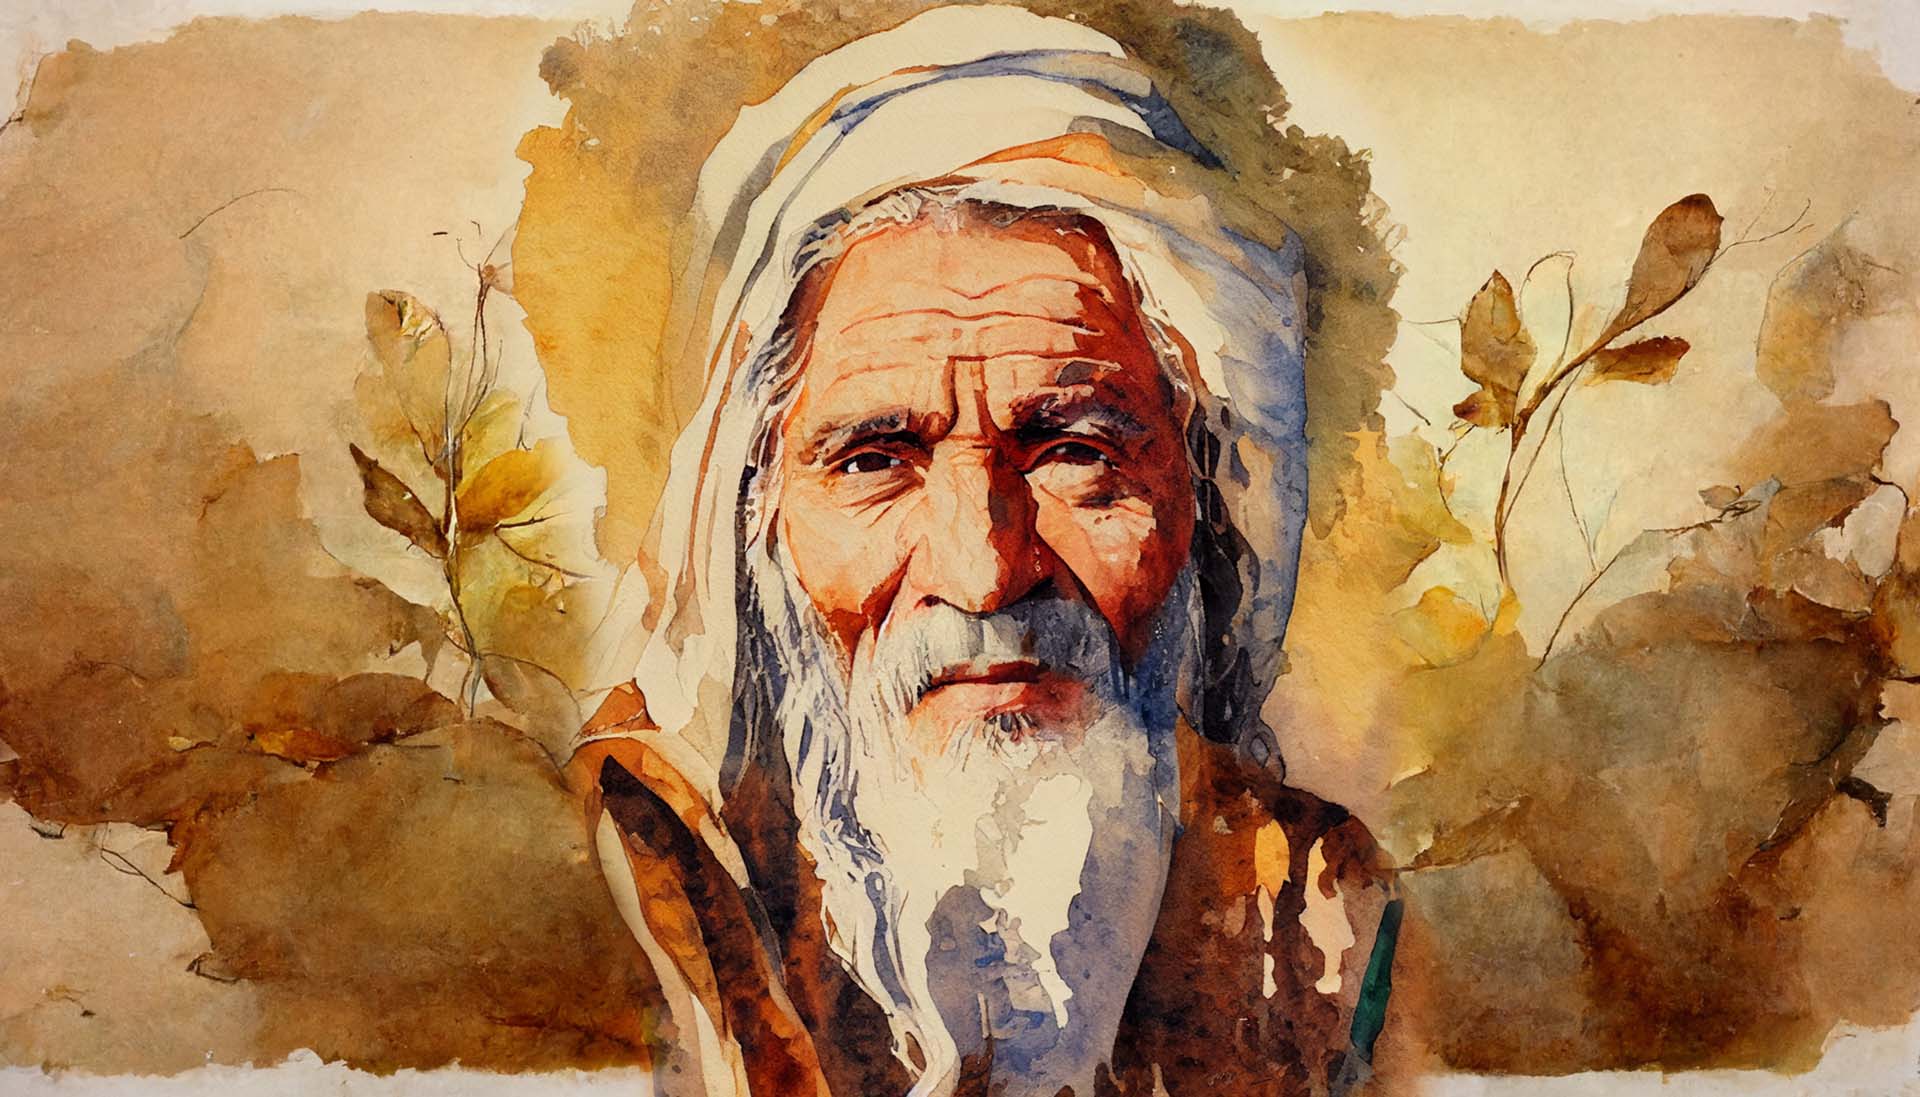 Portrait of Isaiah the Prophet. Images generated by Midjourney.